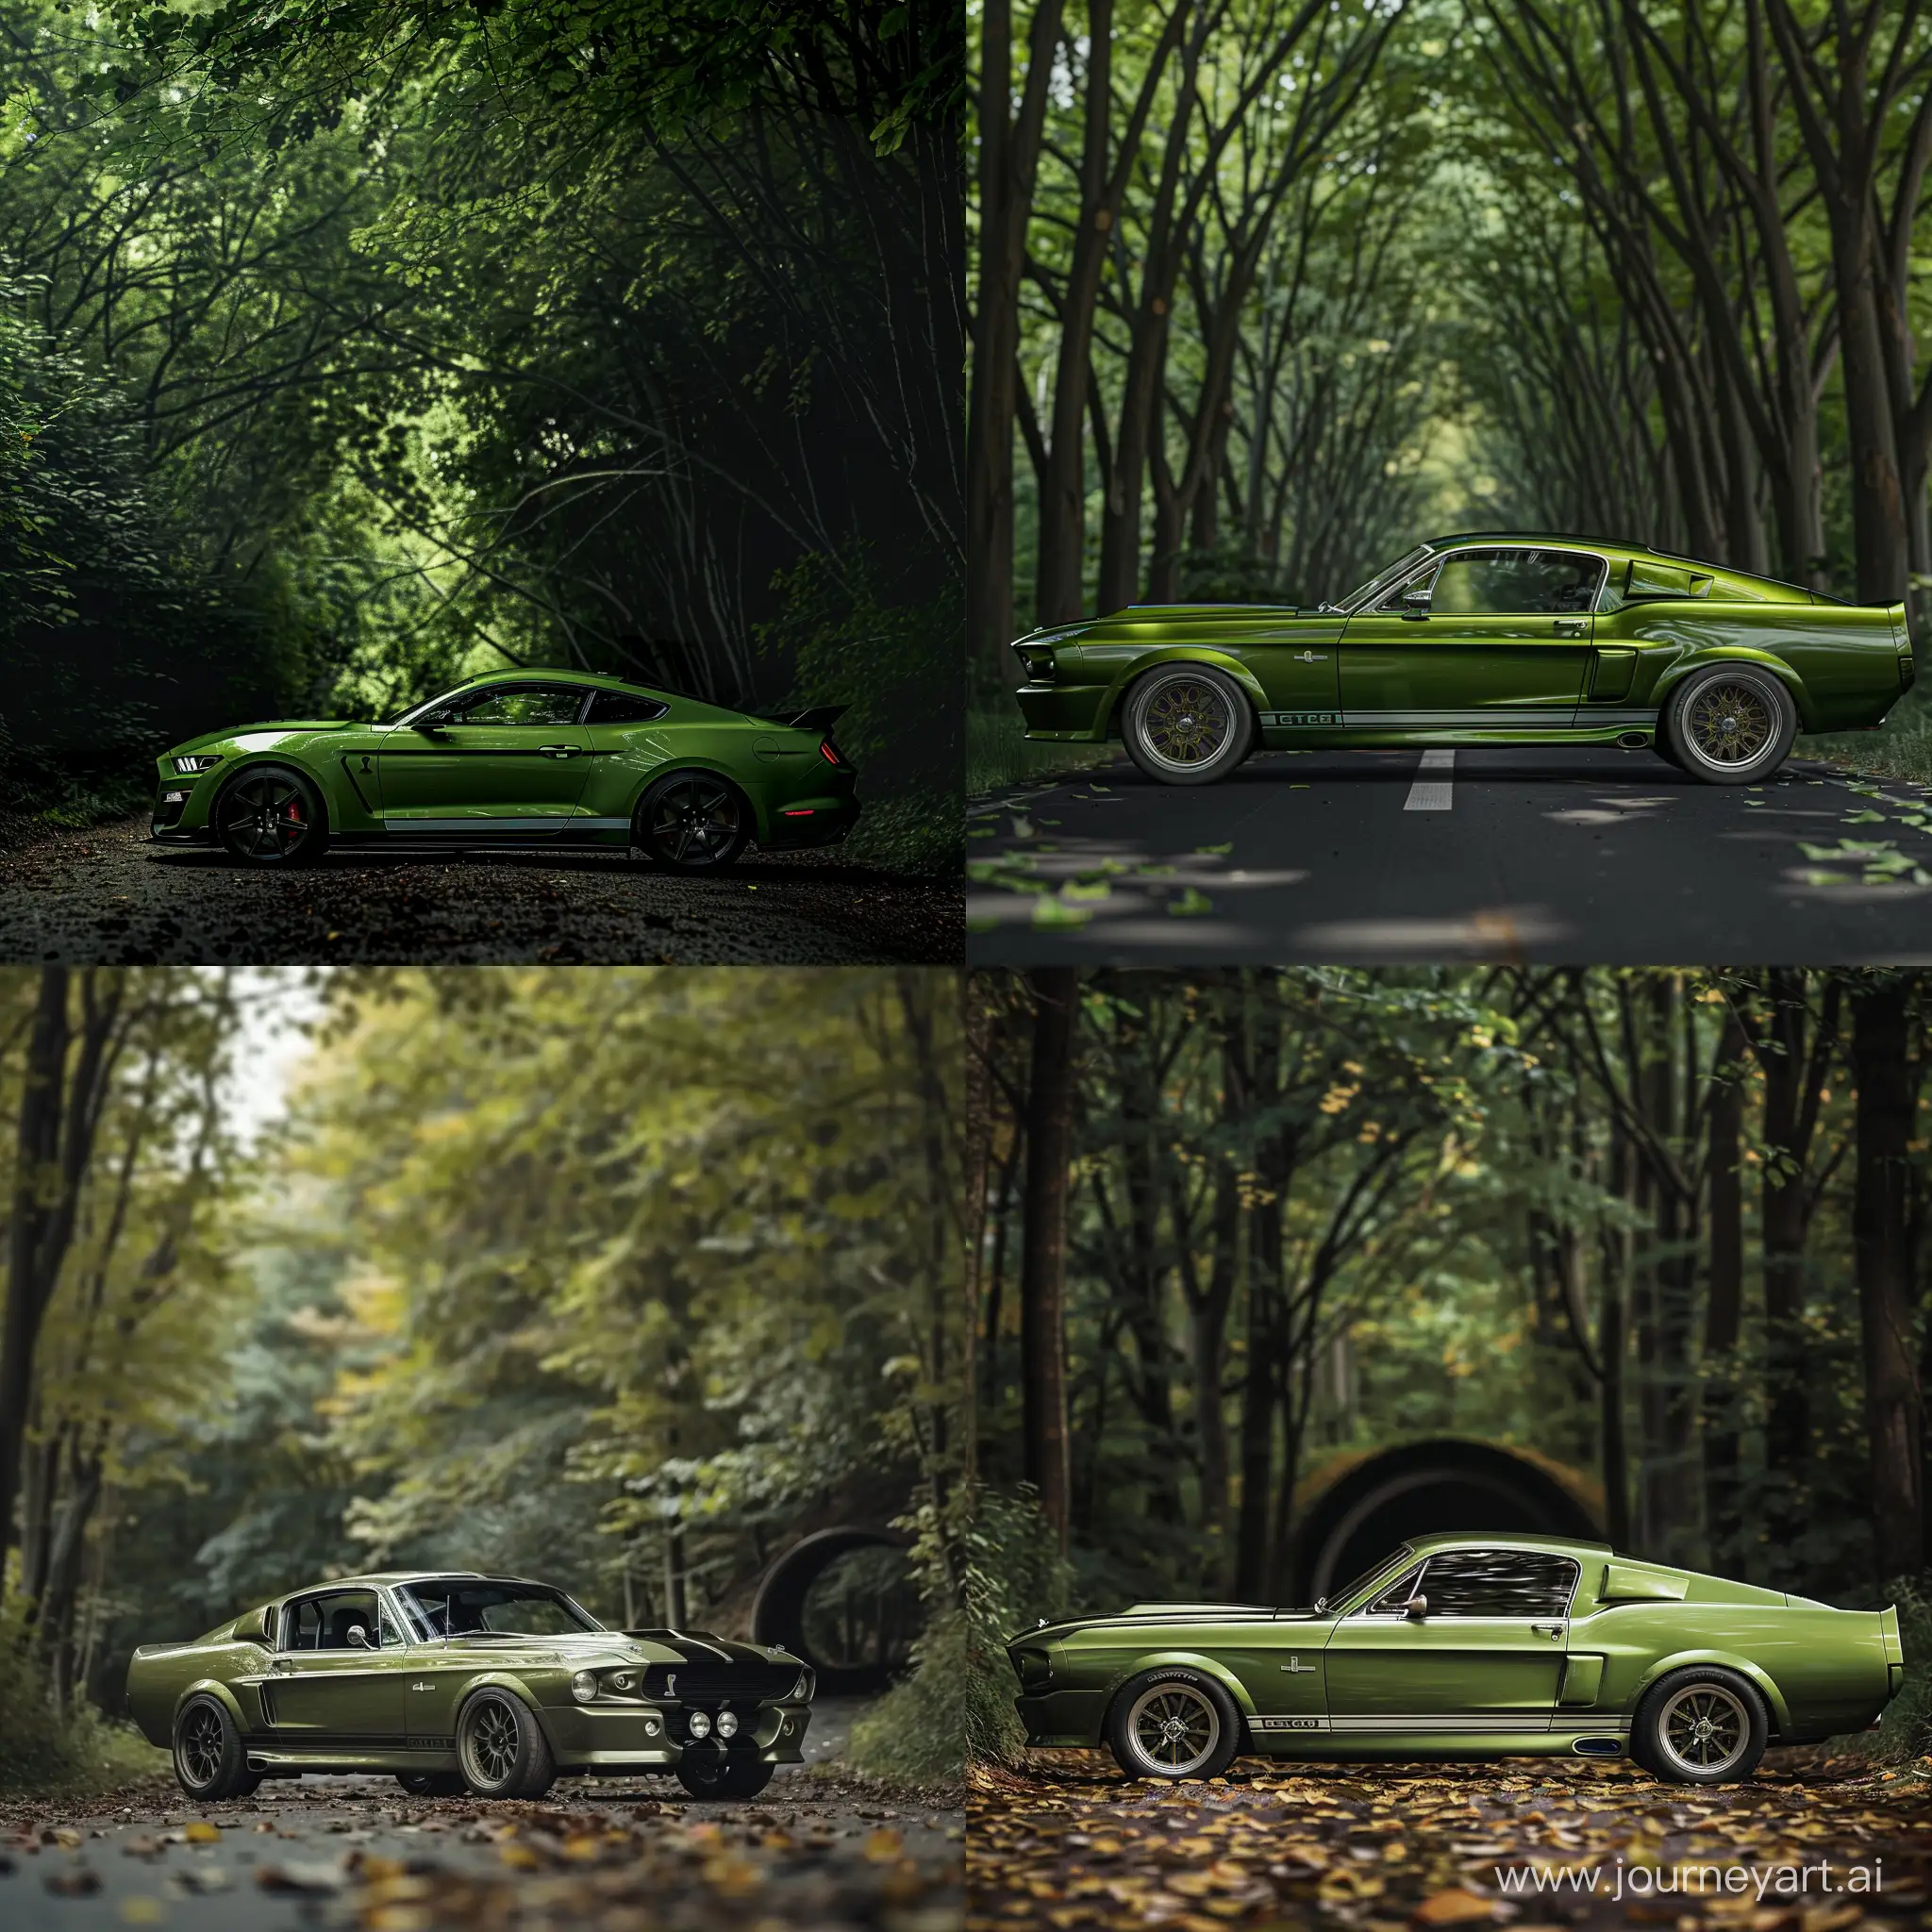 Surreal-HighSpeed-Capture-Green-Mustang-Shelby-Racing-Through-Tunnel-of-Trees